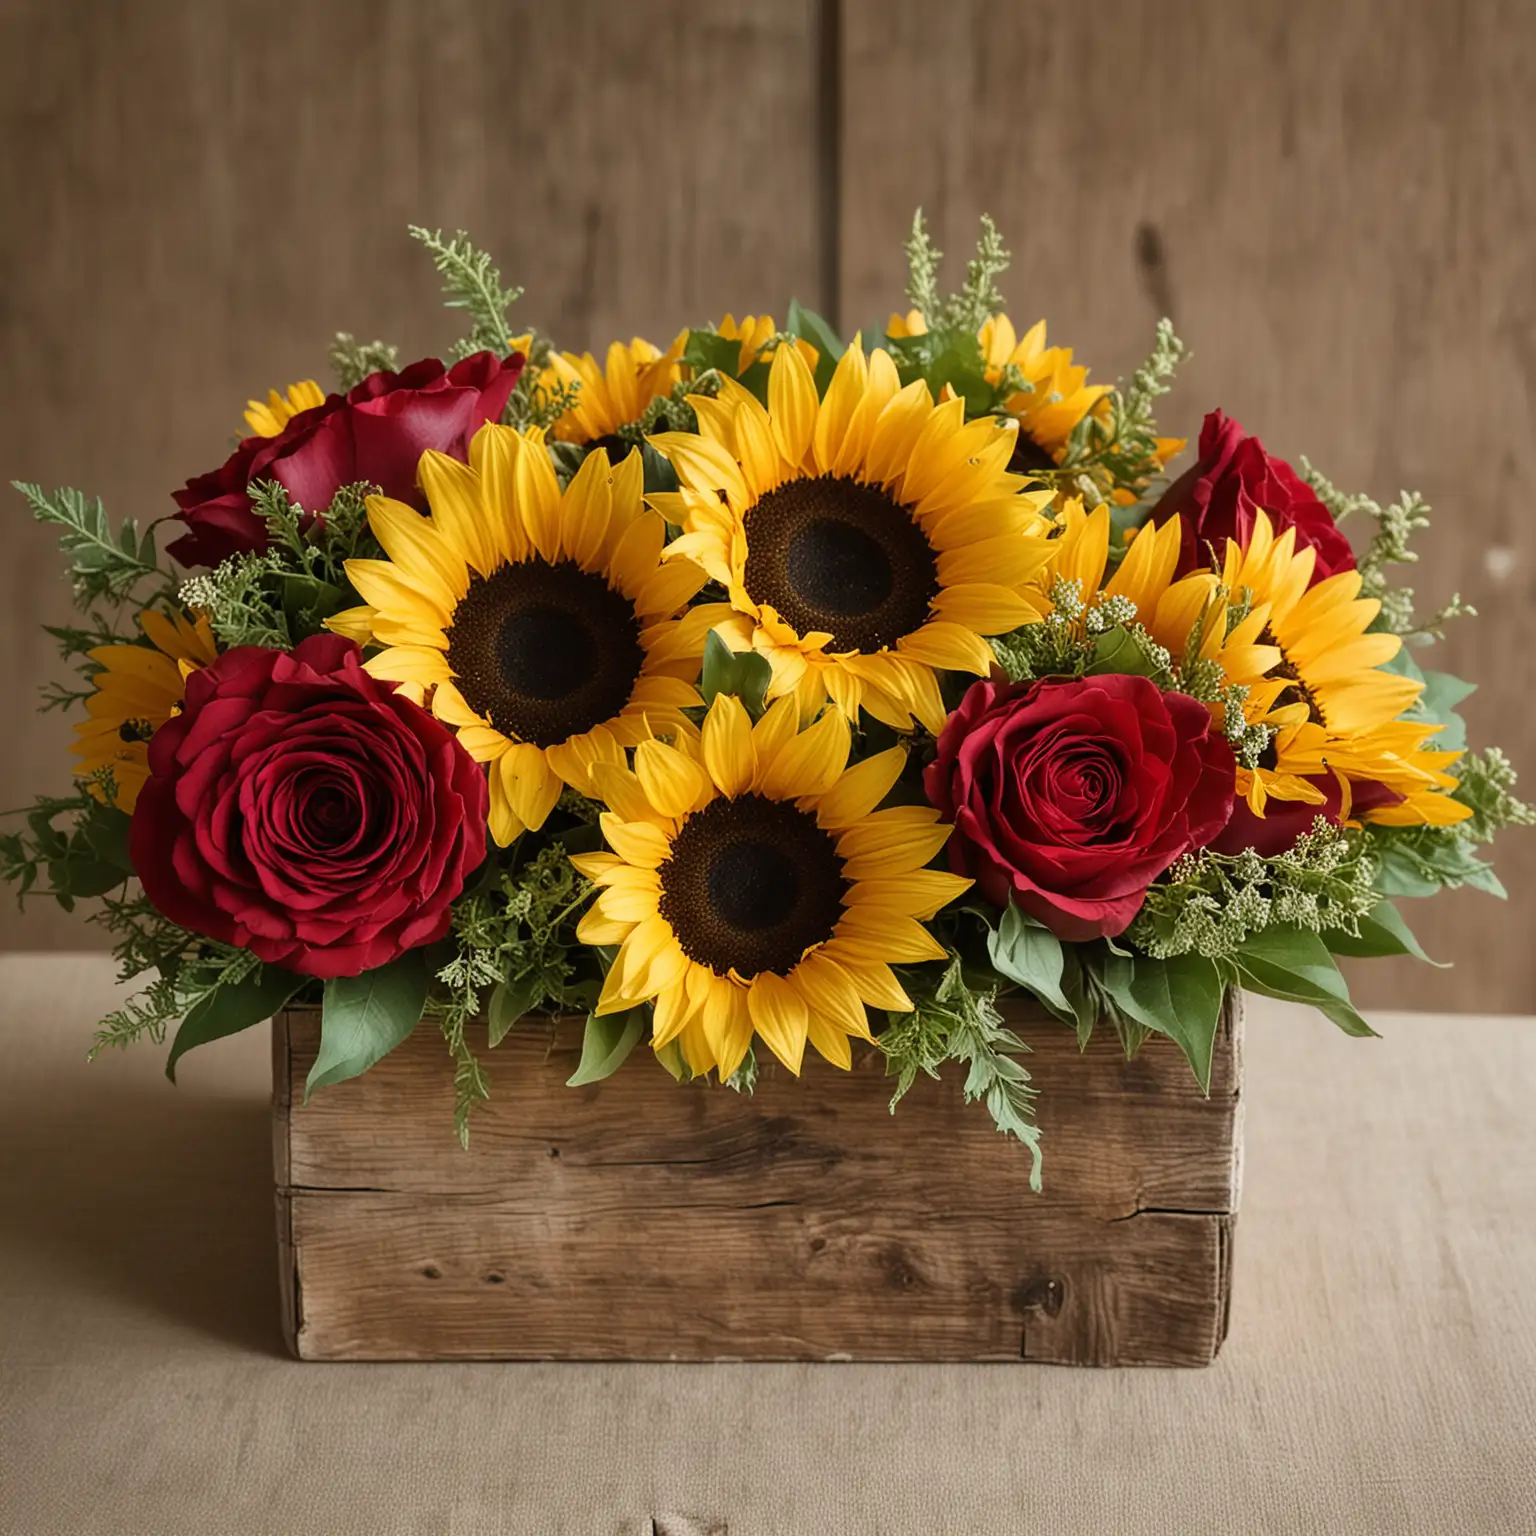 Rustic-Sunflower-and-Red-Rose-Floral-Centerpiece